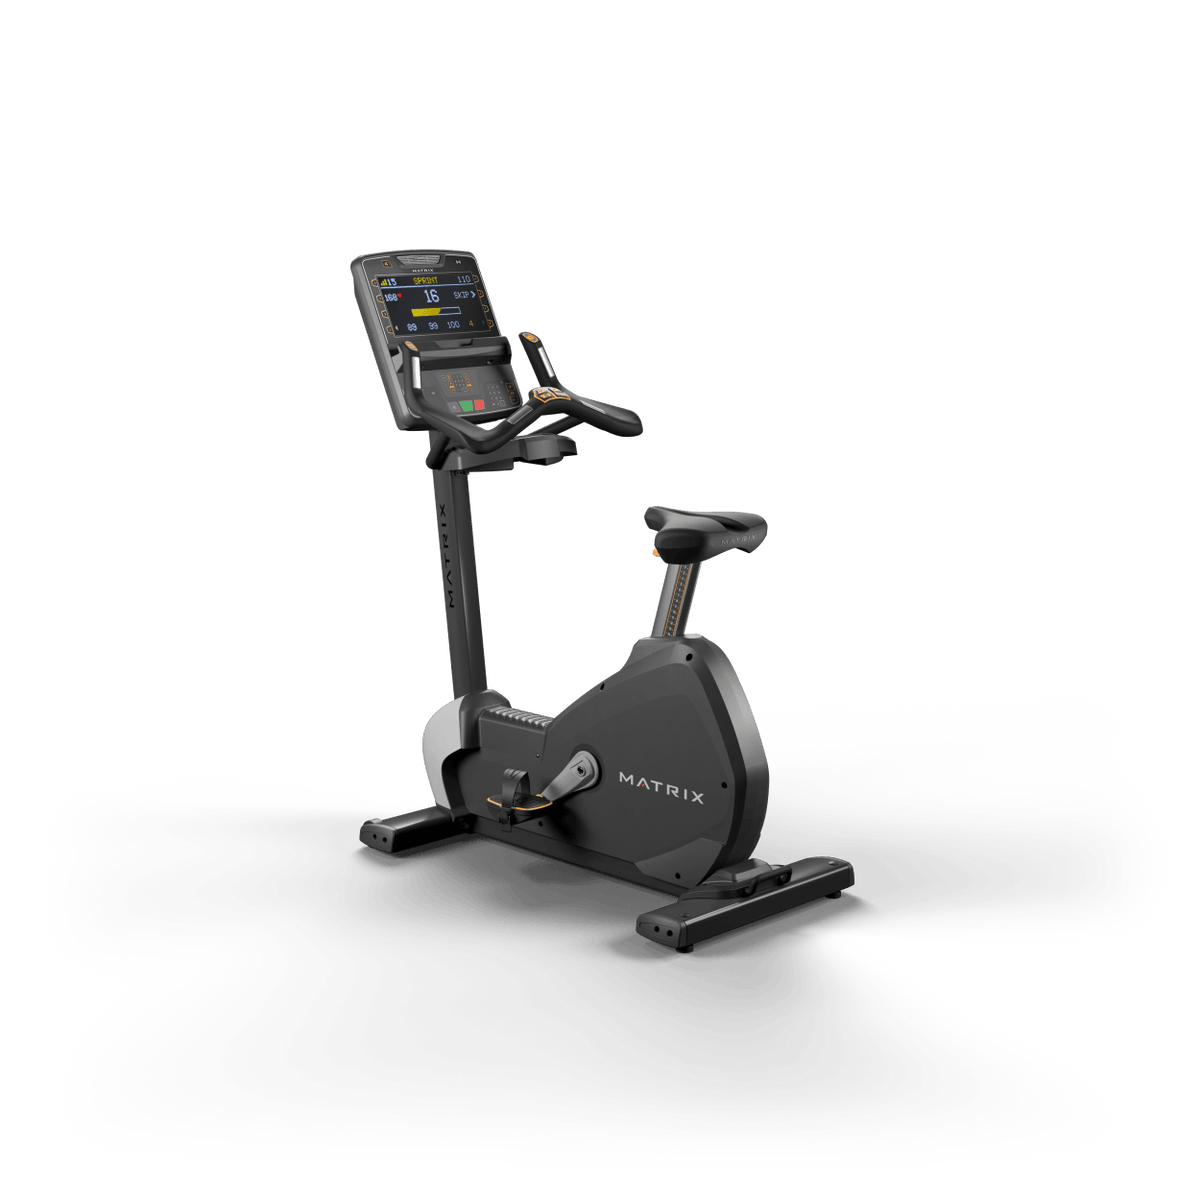 Matrix Fitness Performance Upright with Premium LED Console full view | Fitness Experience